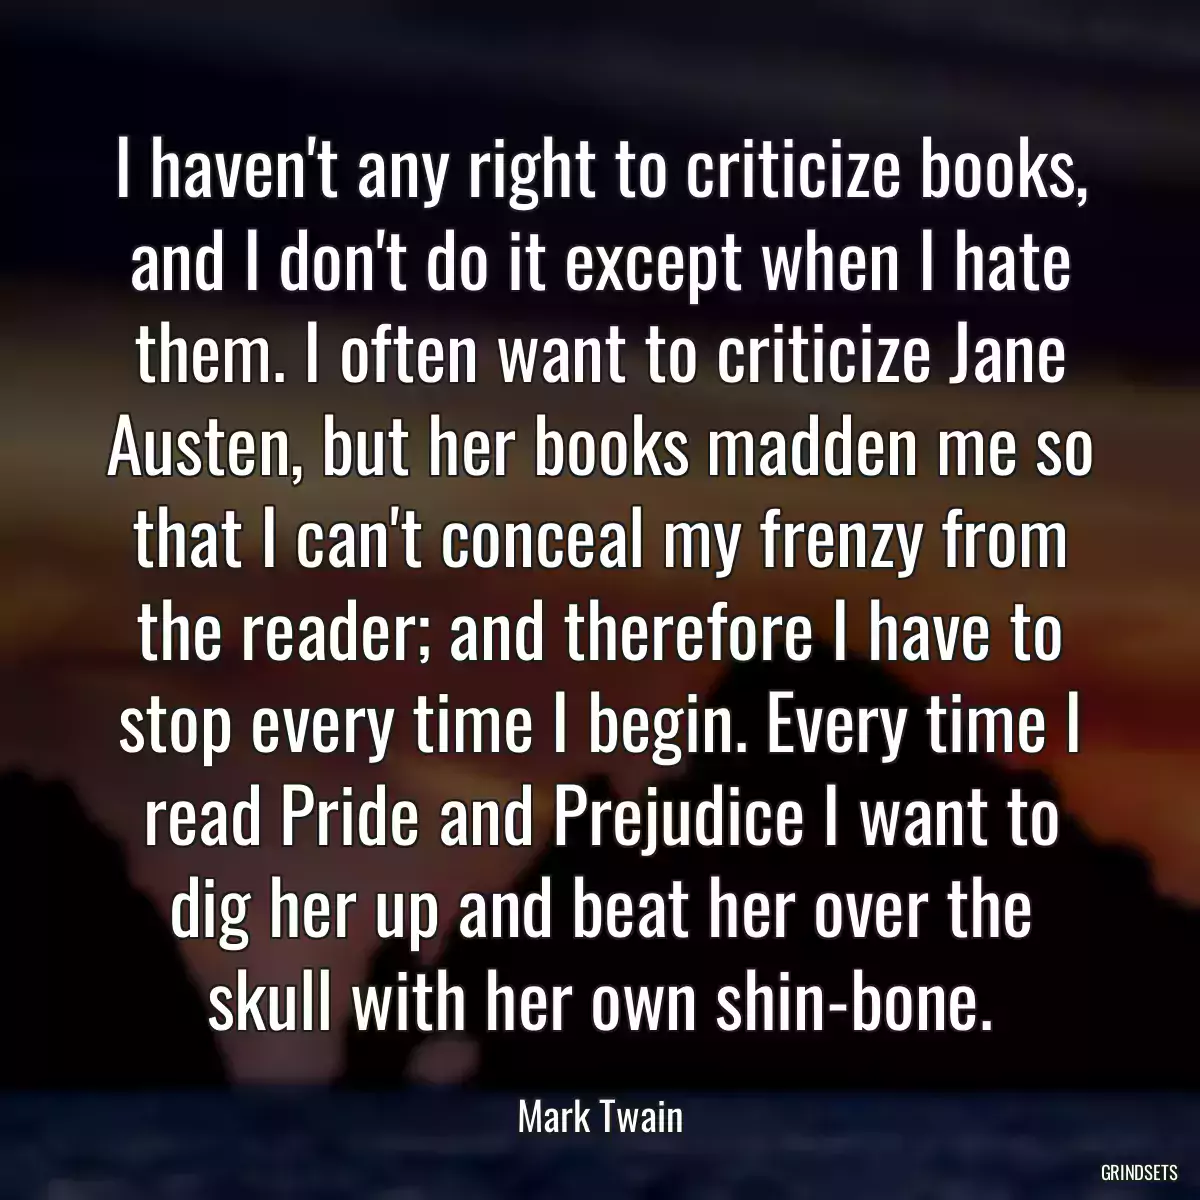 I haven\'t any right to criticize books, and I don\'t do it except when I hate them. I often want to criticize Jane Austen, but her books madden me so that I can\'t conceal my frenzy from the reader; and therefore I have to stop every time I begin. Every time I read Pride and Prejudice I want to dig her up and beat her over the skull with her own shin-bone.